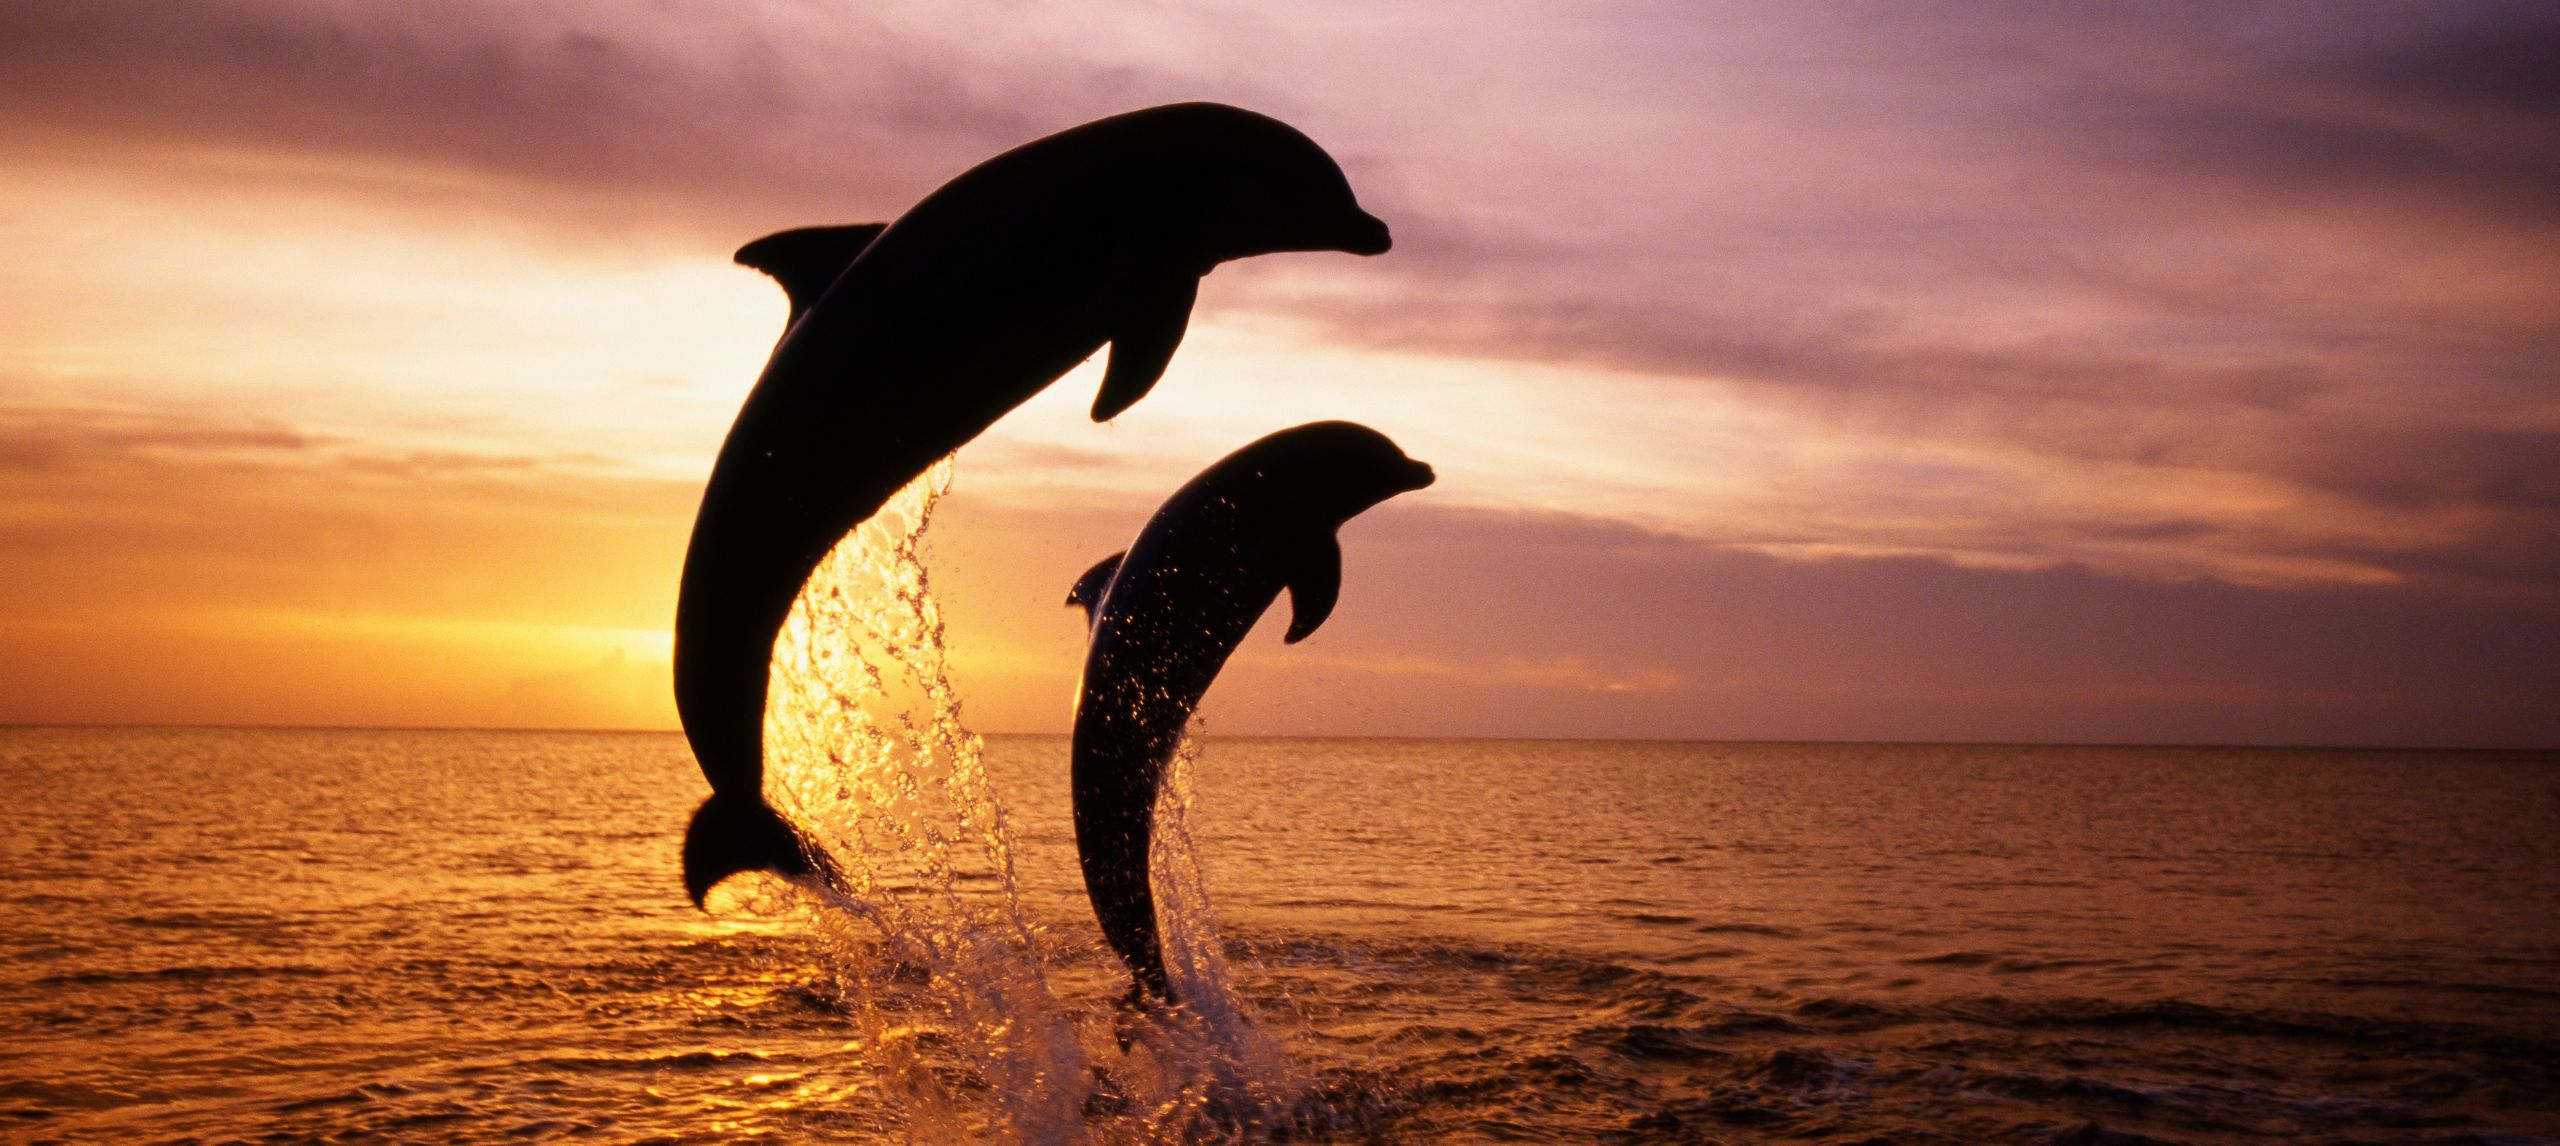 Two dolphins jumping in the air at sunset